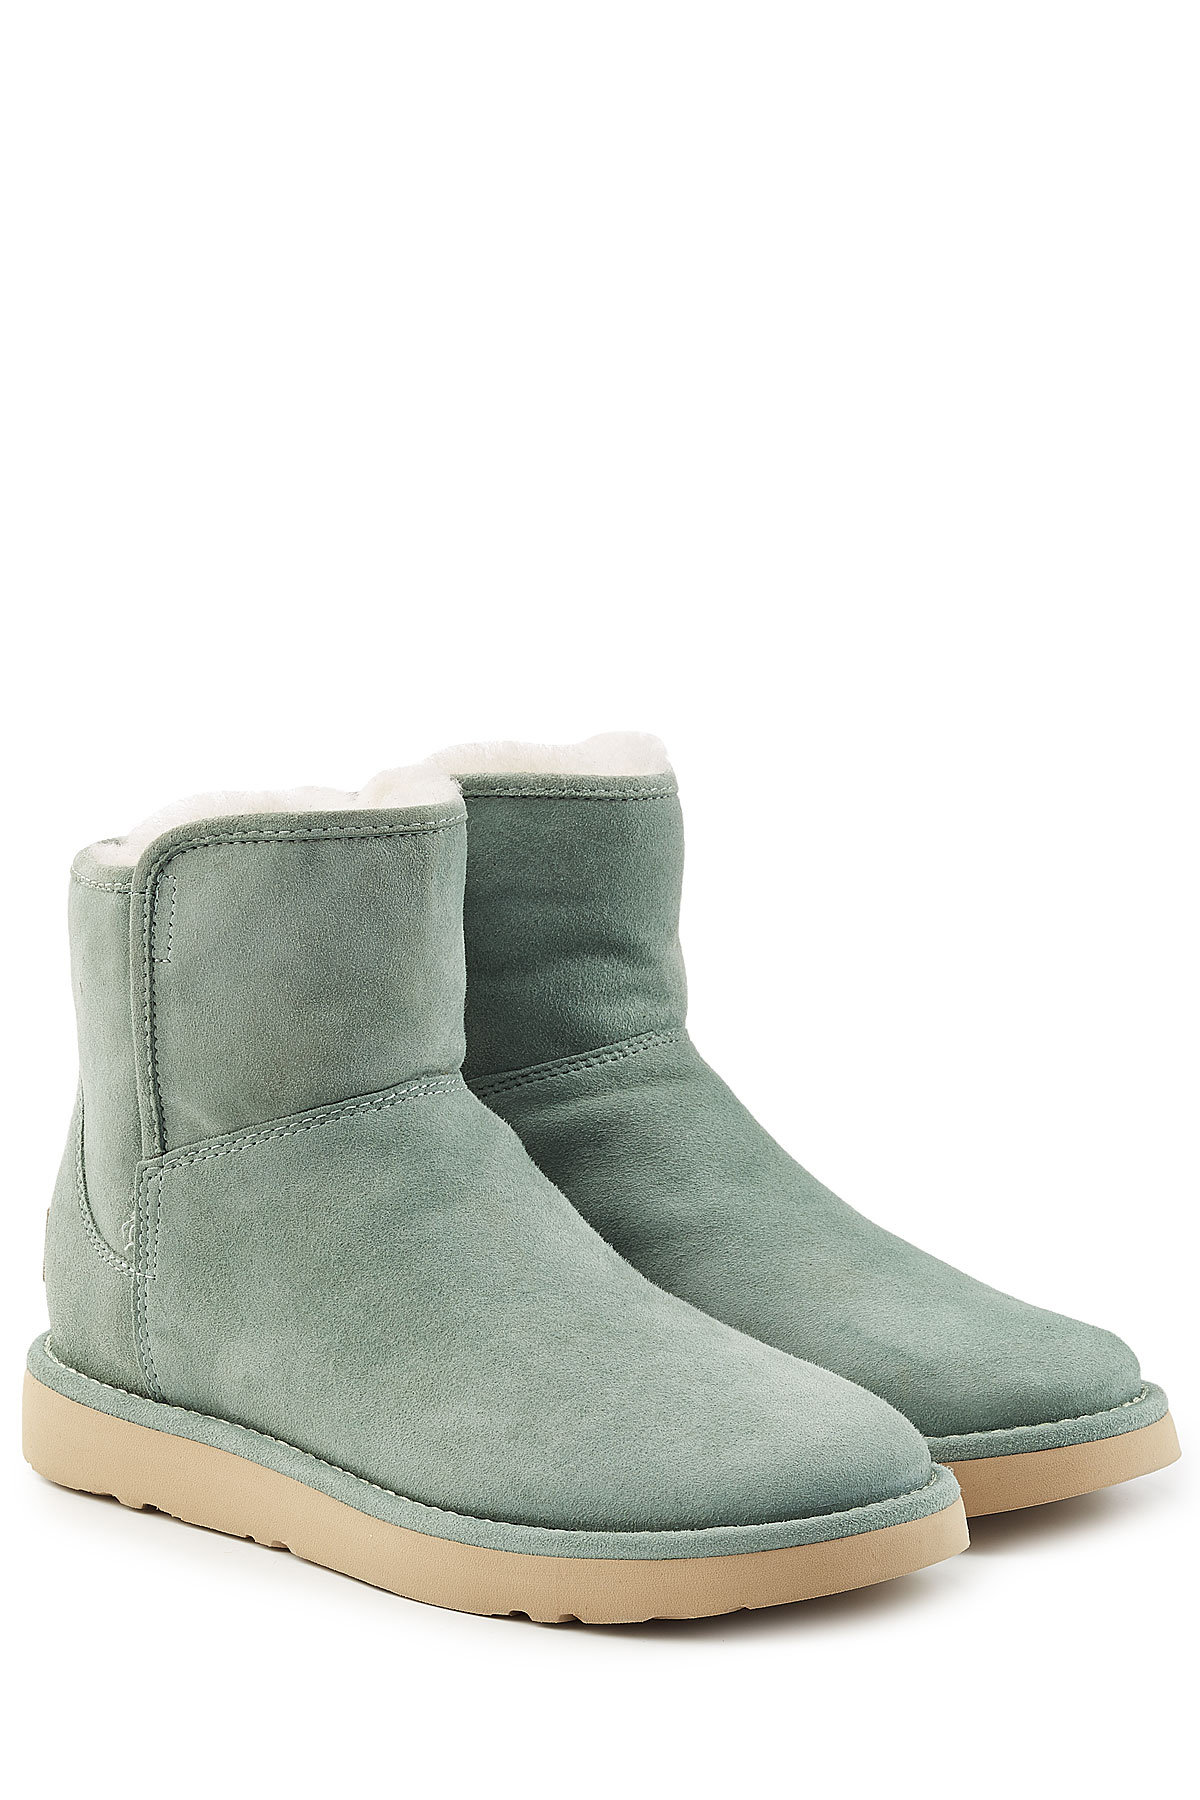 Agree Mini Suede Boots by UGG Australia